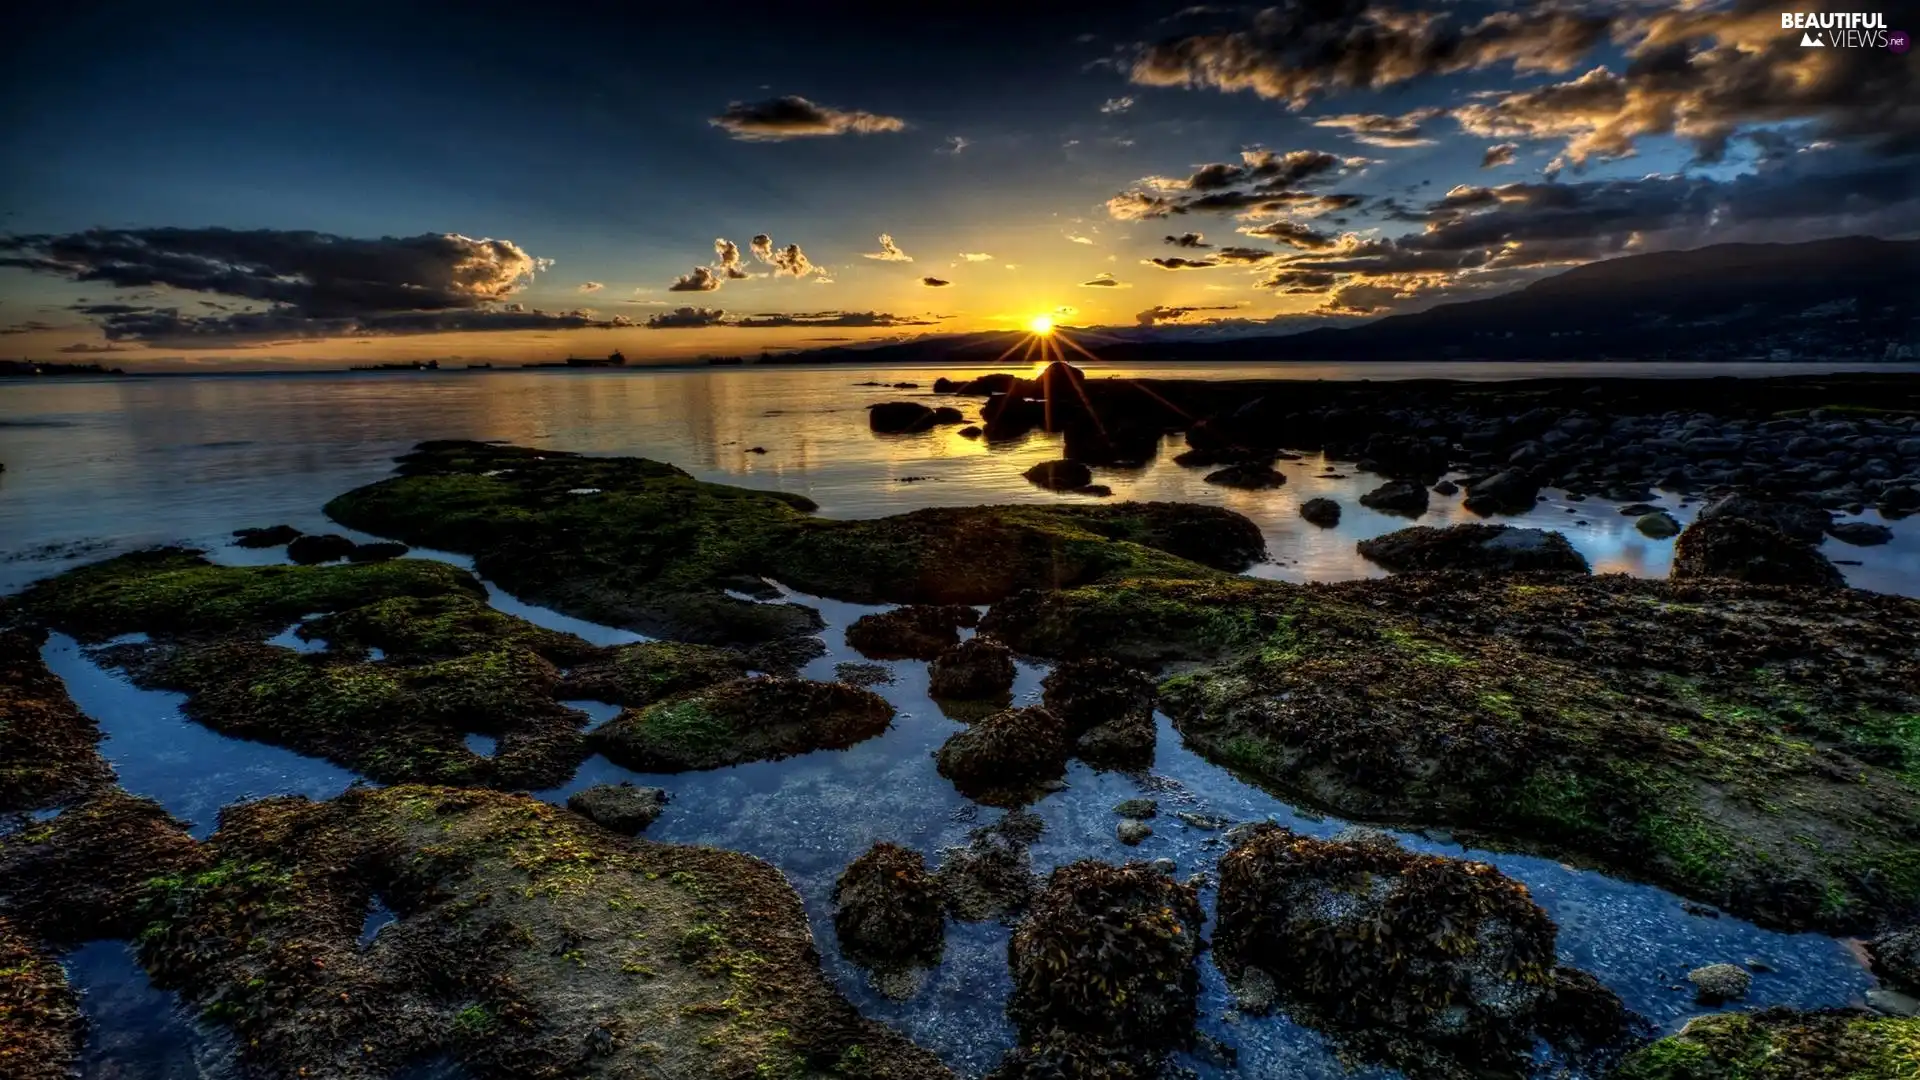 rays, Great Sunsets, mossy, Stones, lake